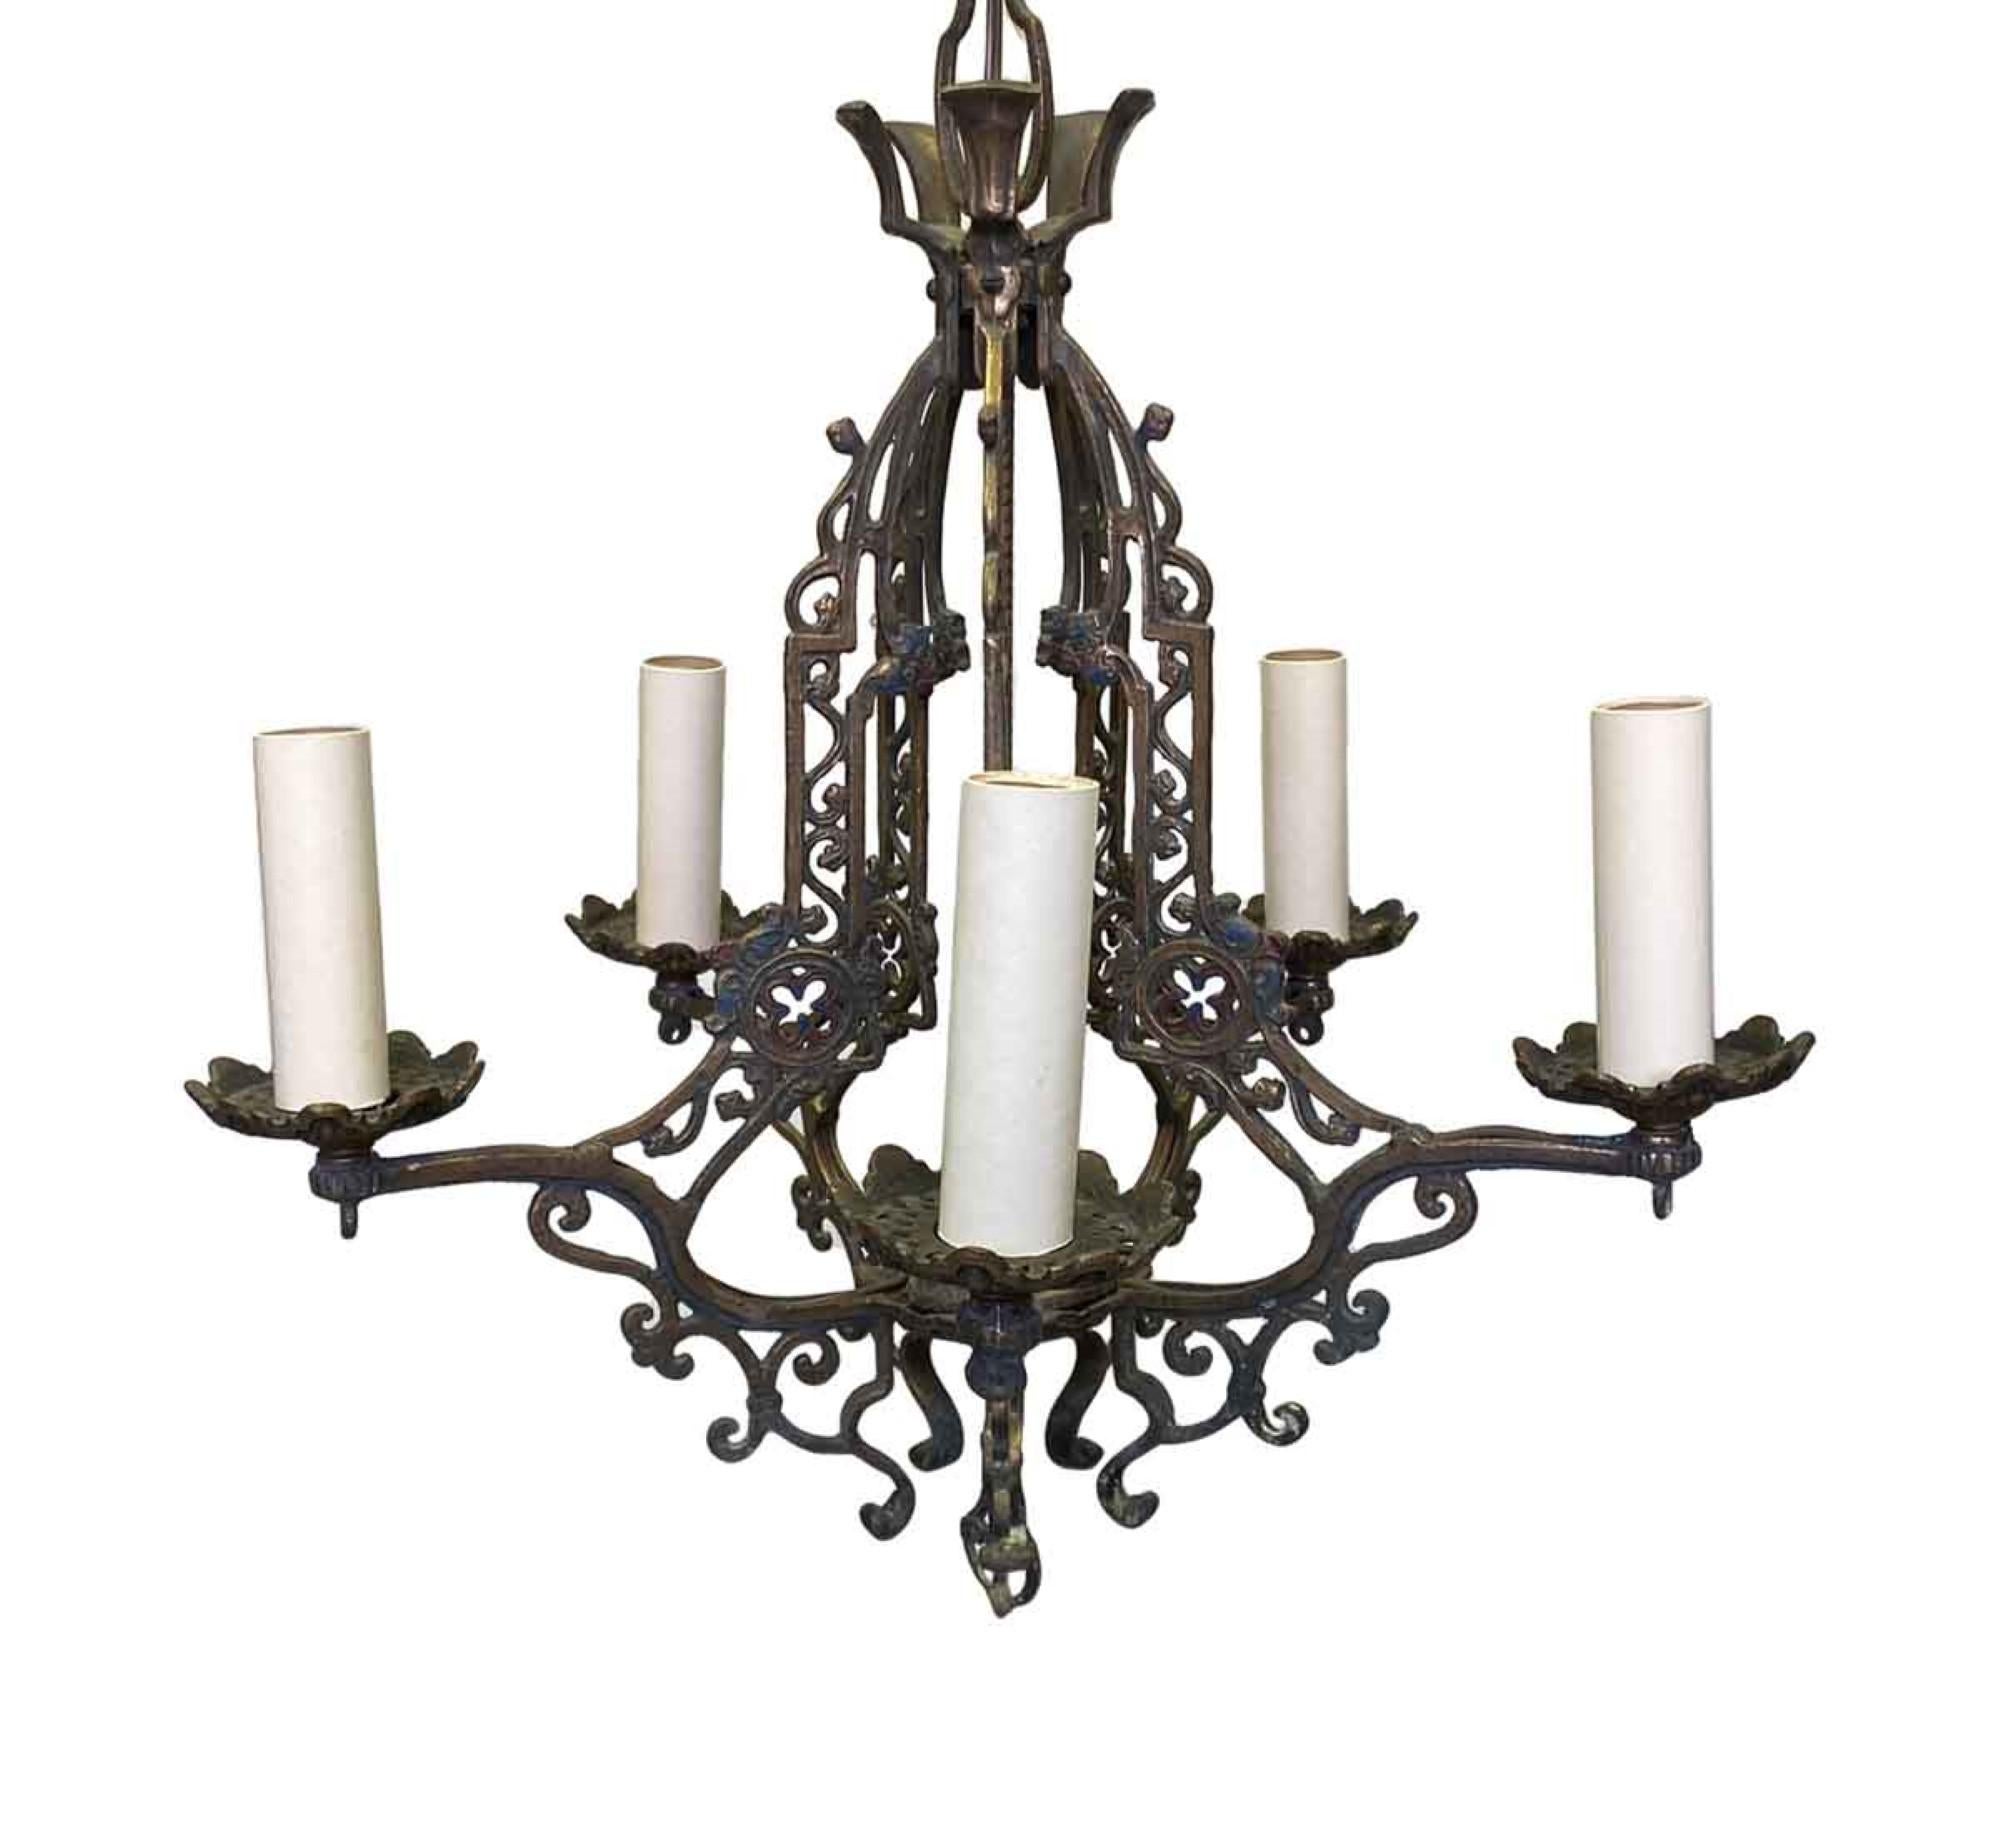 1910s heavy cast bronze five-arm Arts & Crafts chandelier with a deep patina and painted details. This can be seen at our 400 Gilligan St location in Scranton, PA.